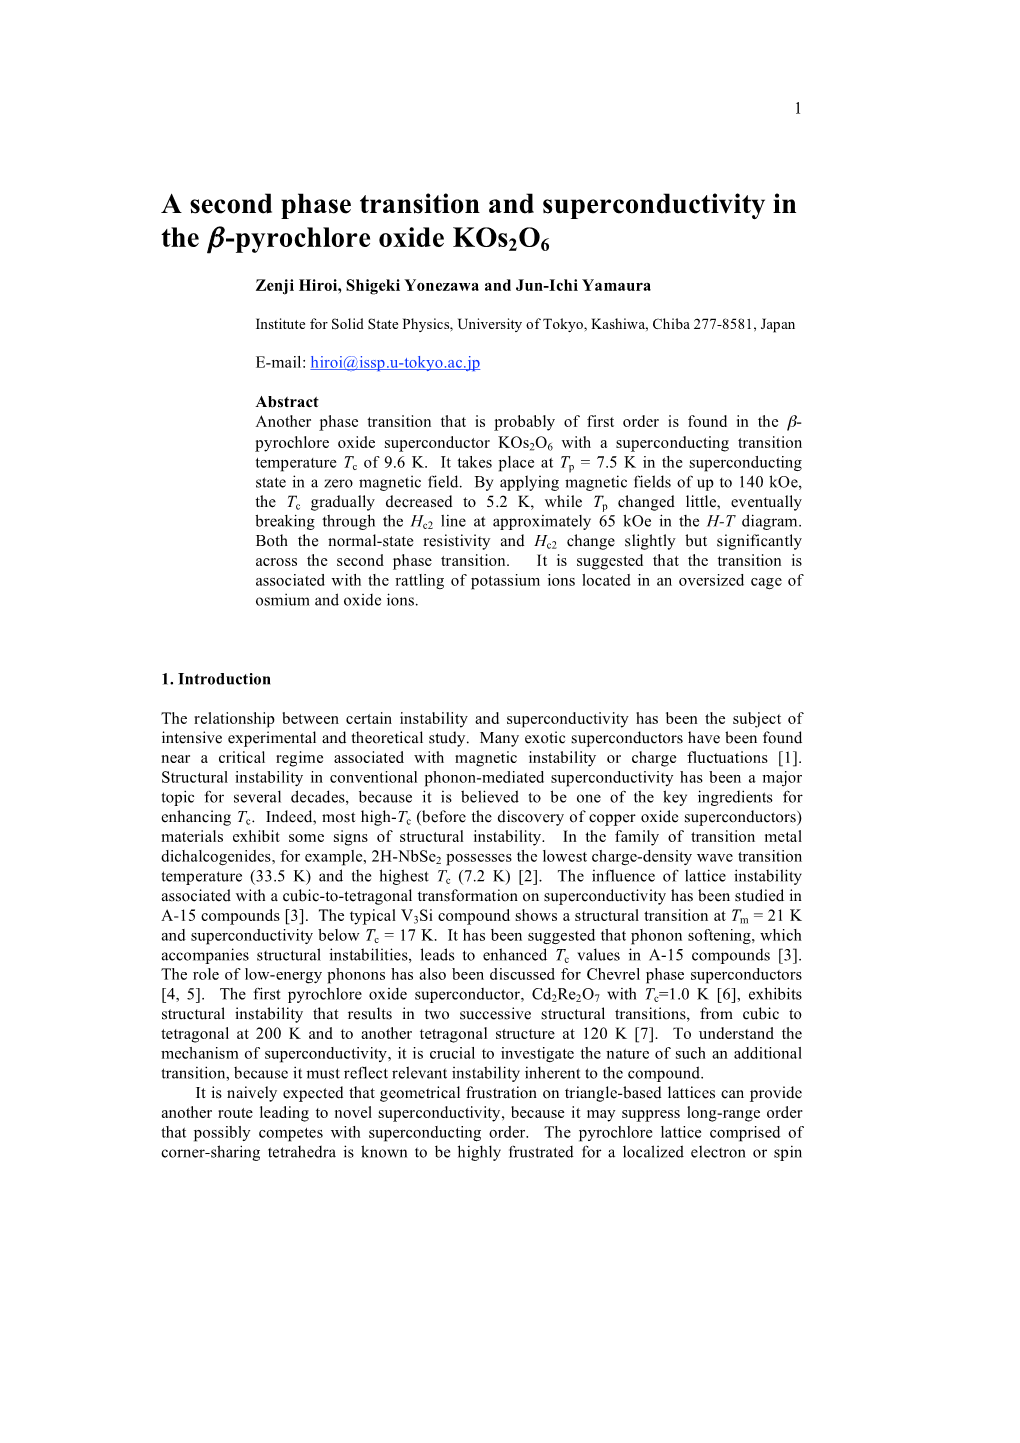 A Second Phase Transition and Superconductivity in the Β-Pyrochlore Oxide Kos2o6